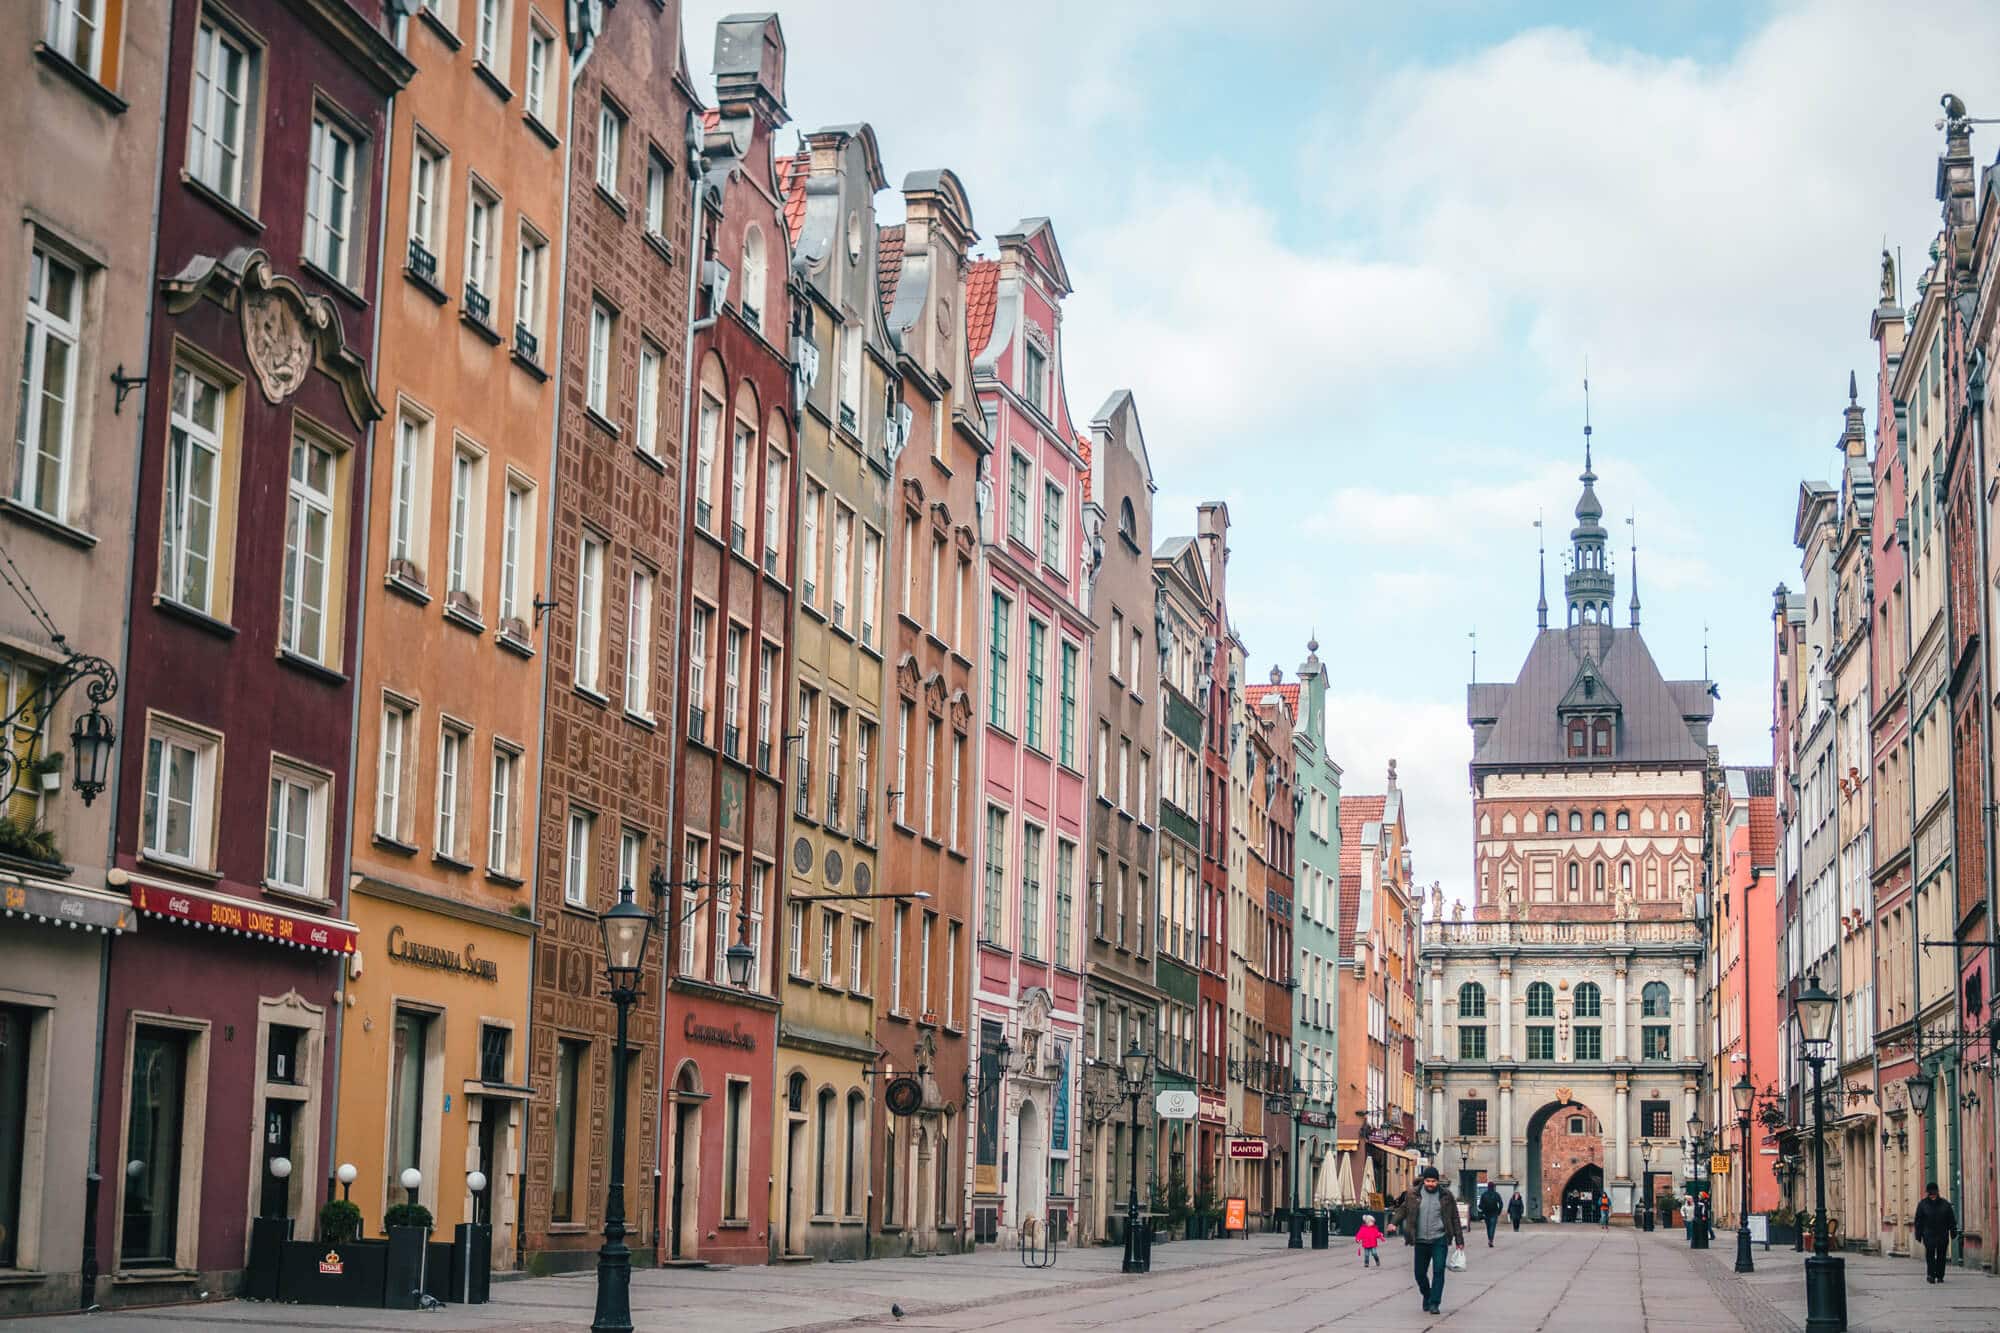 2 days in Gdansk, Poland - Take a stroll down Long Street towards the Golden Gate